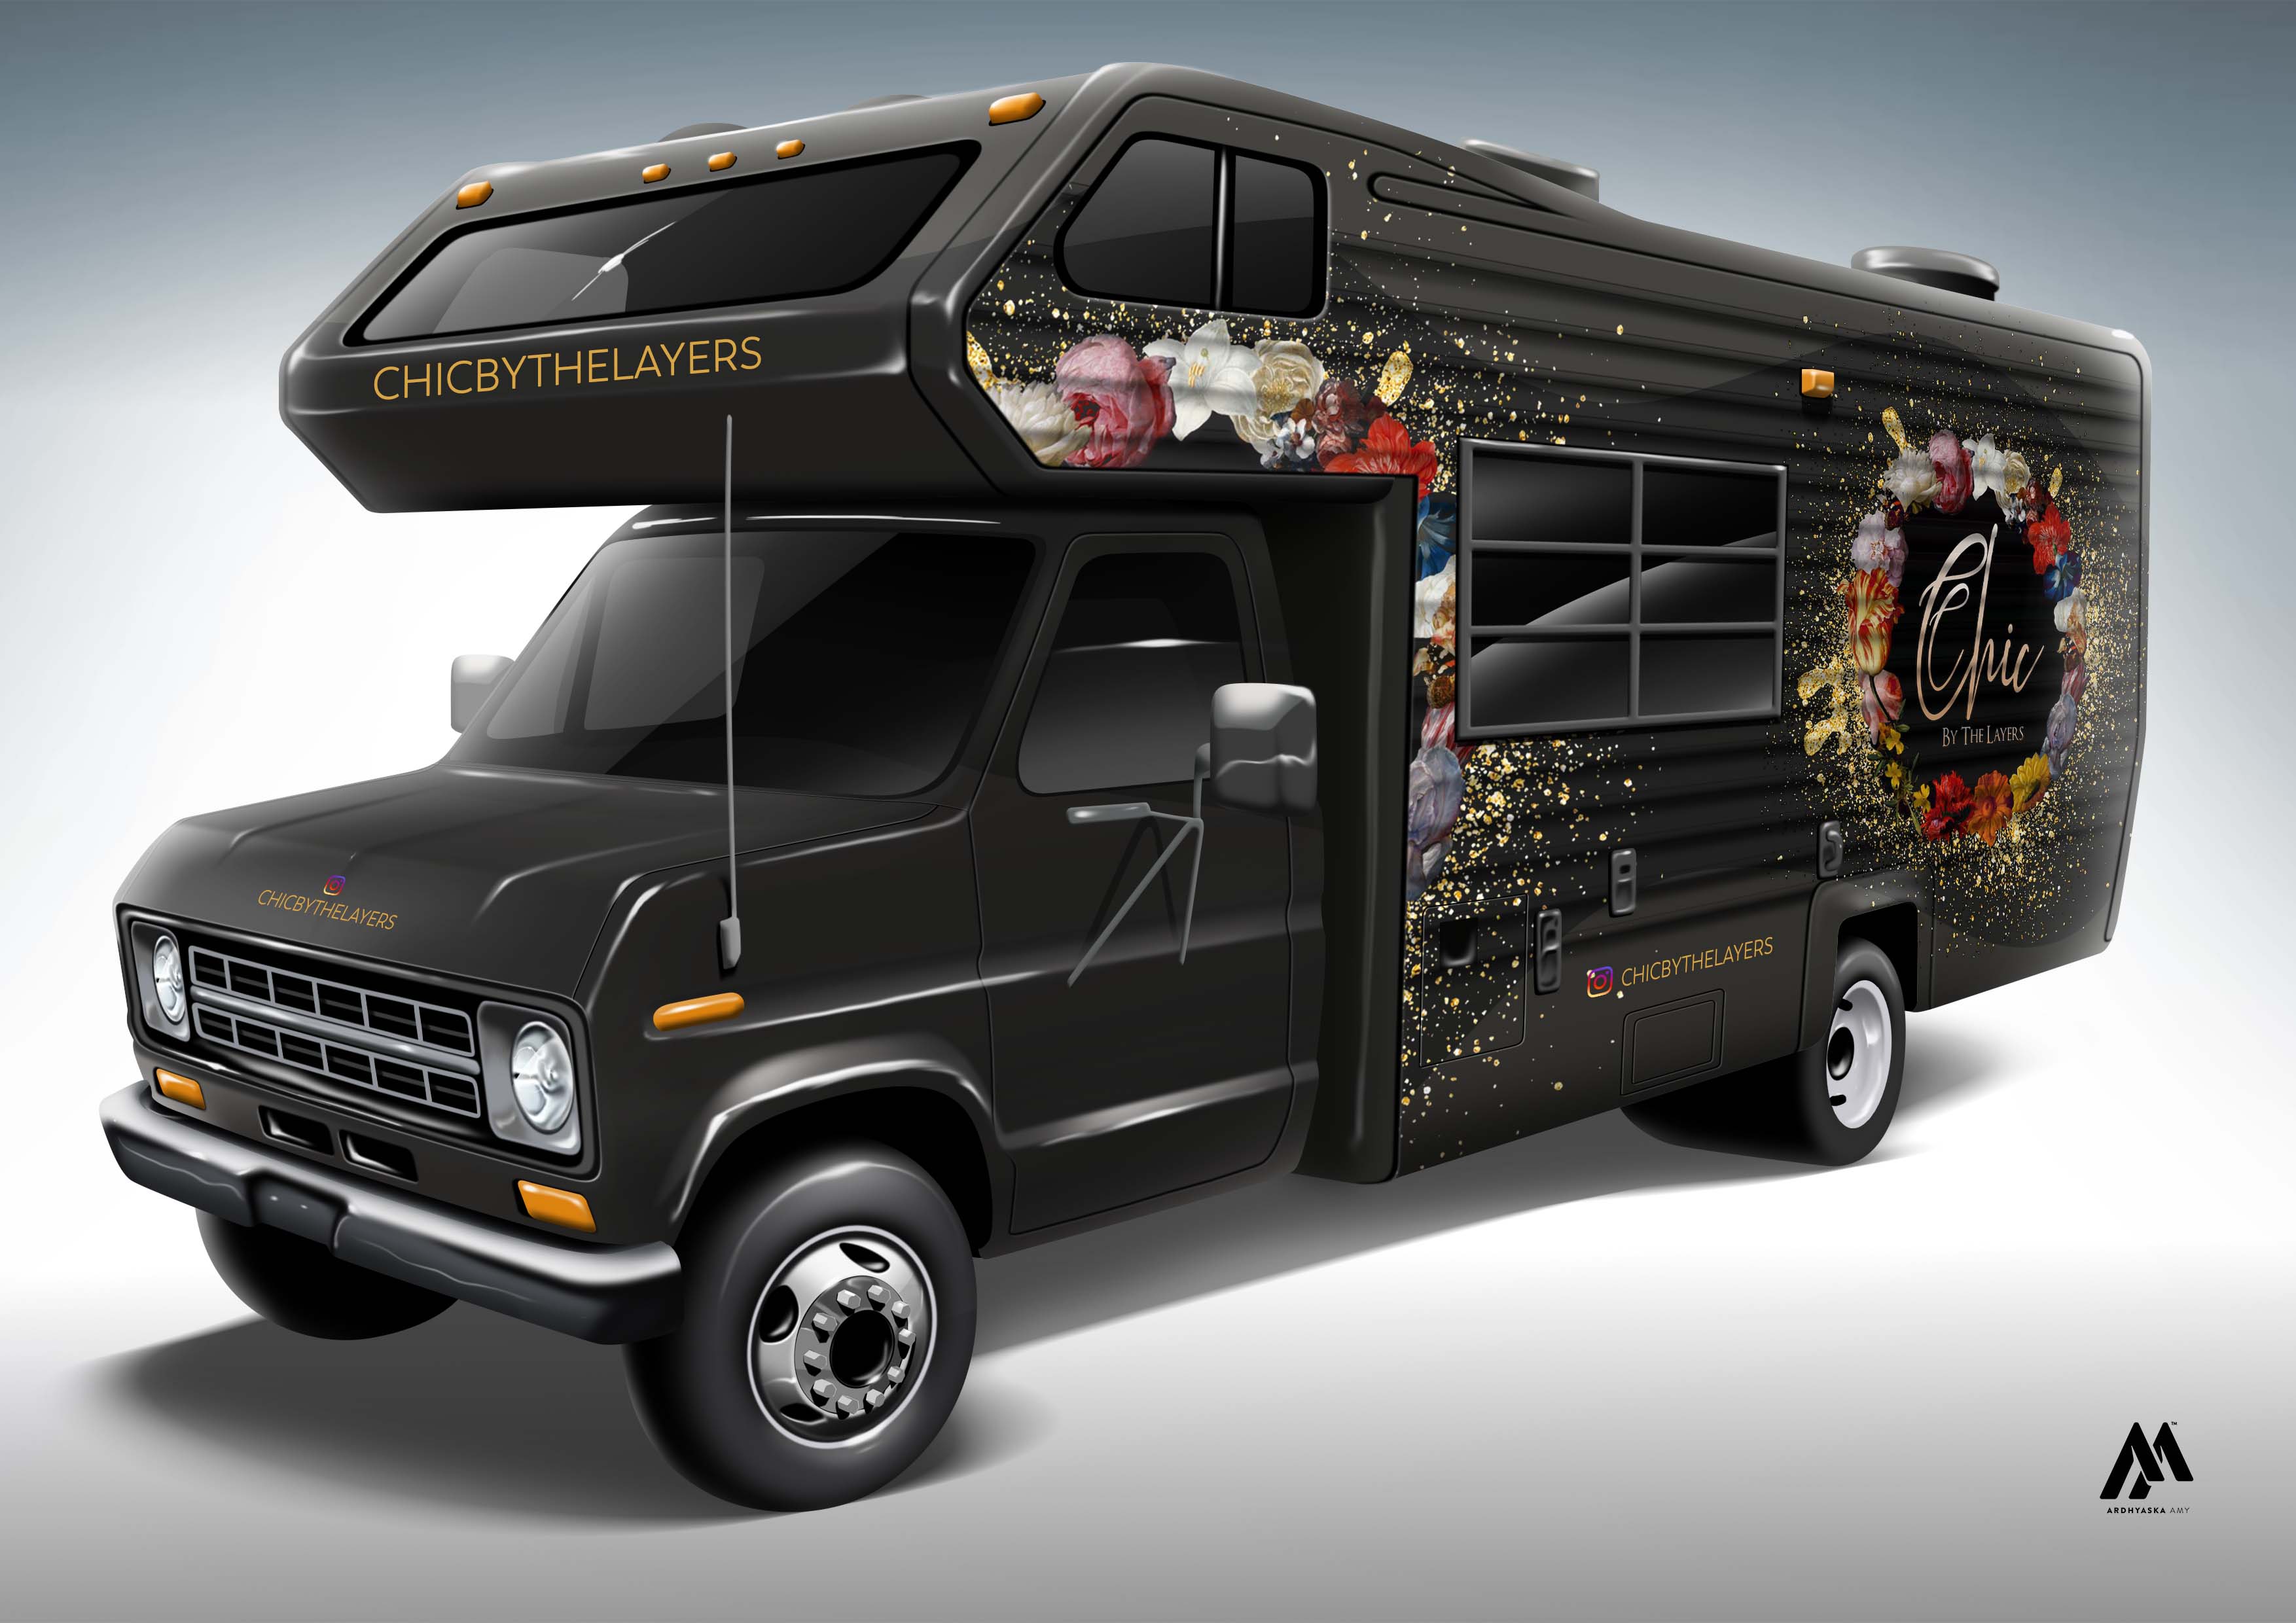 Chicbythelayers Pre Launches a Luxurious Modern Mobile Salon